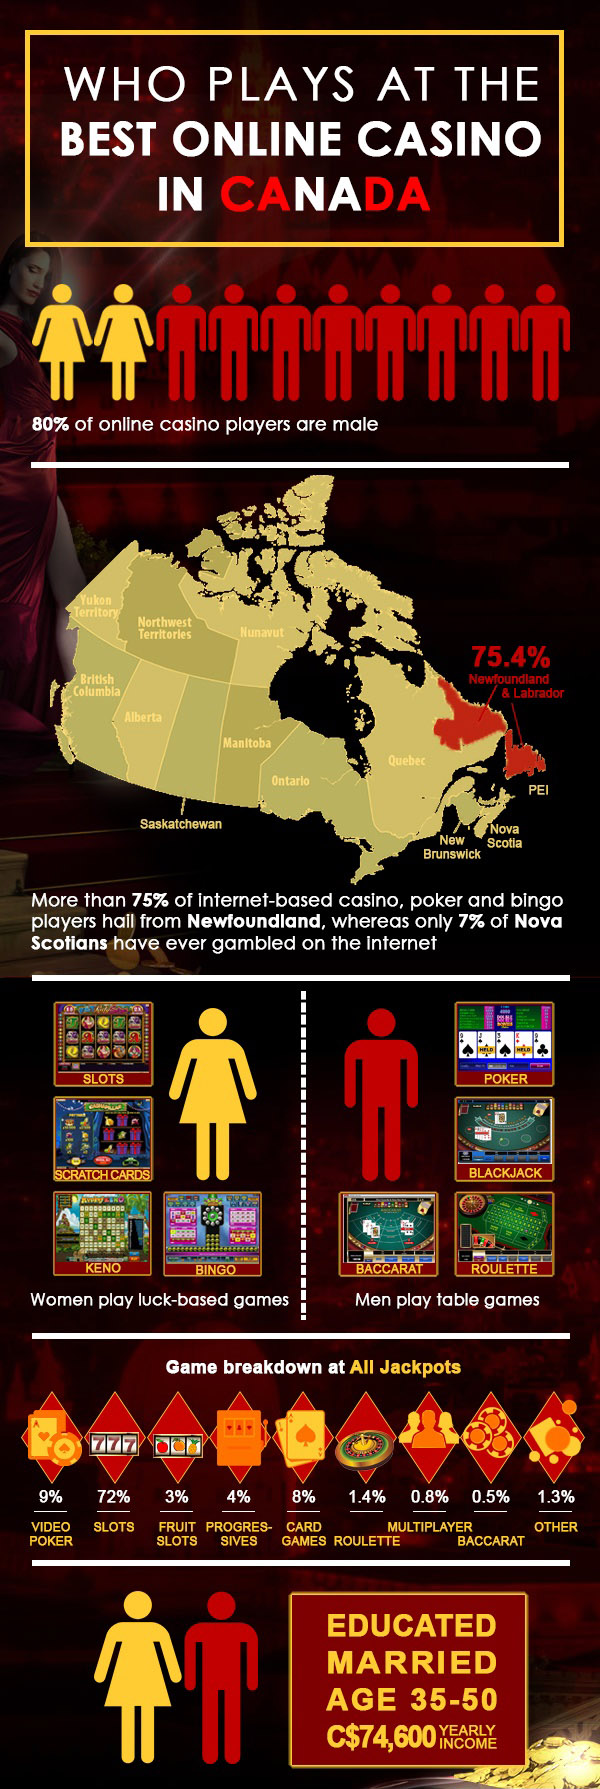 Who Plays at the Online Casino in Canada and Why - Infografic